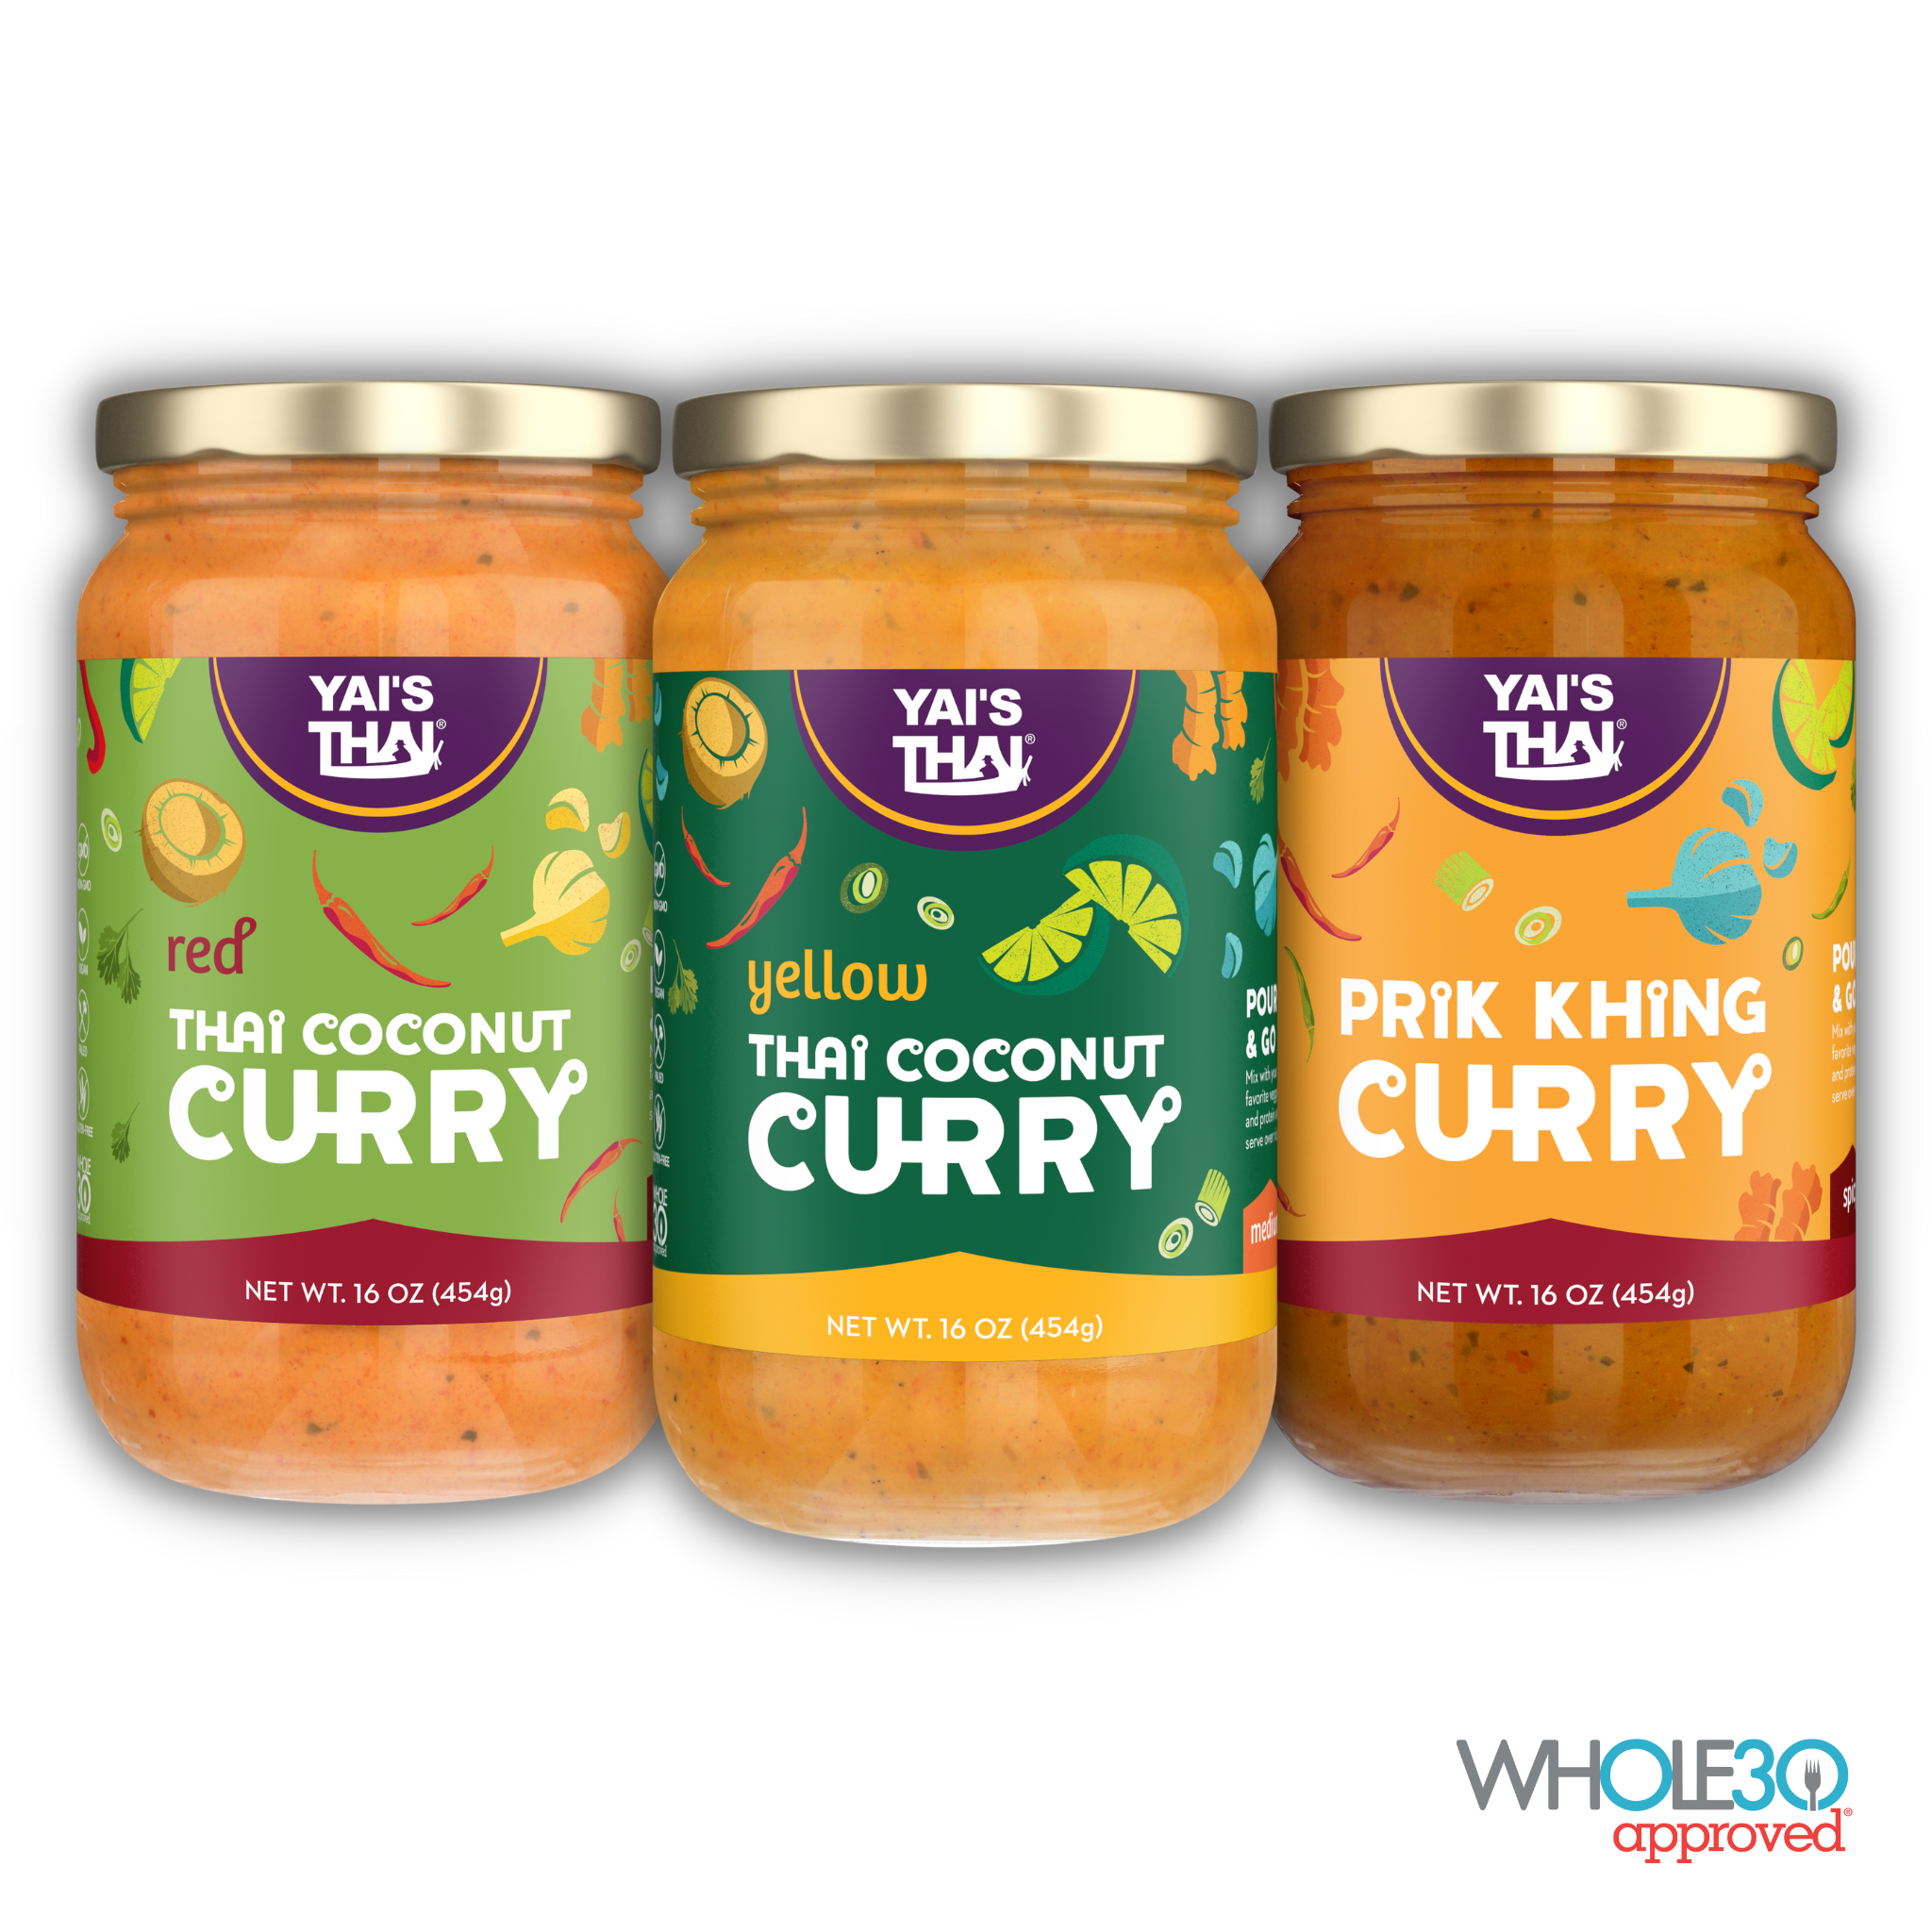 Whole30 Approved® Curries